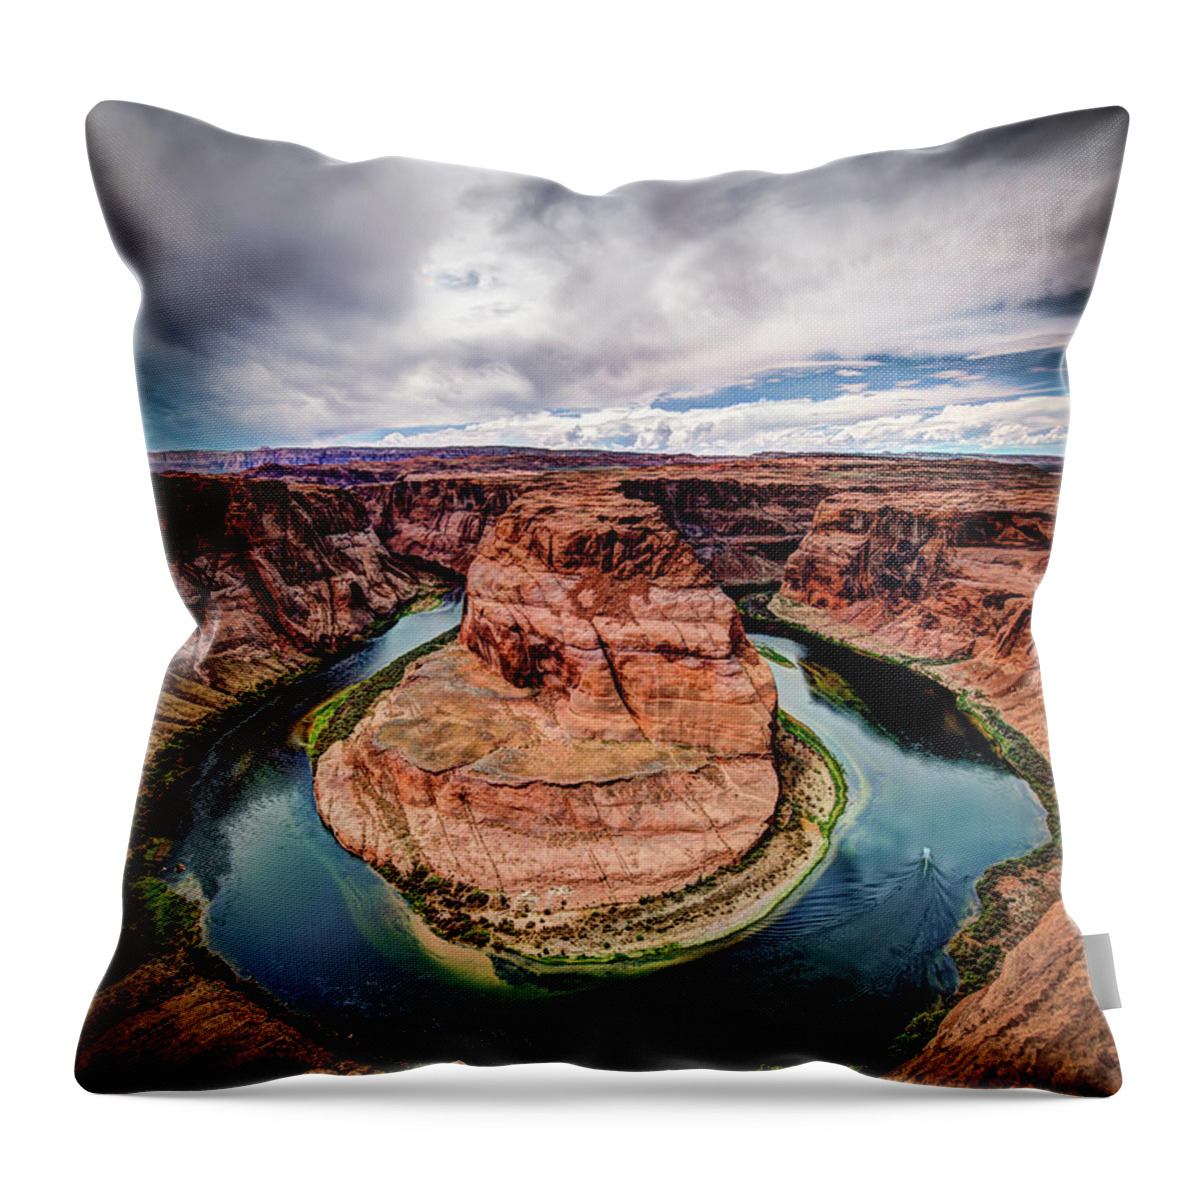 Arizona Throw Pillow featuring the photograph Horseshoe Bend 1205 by Kenneth Johnson